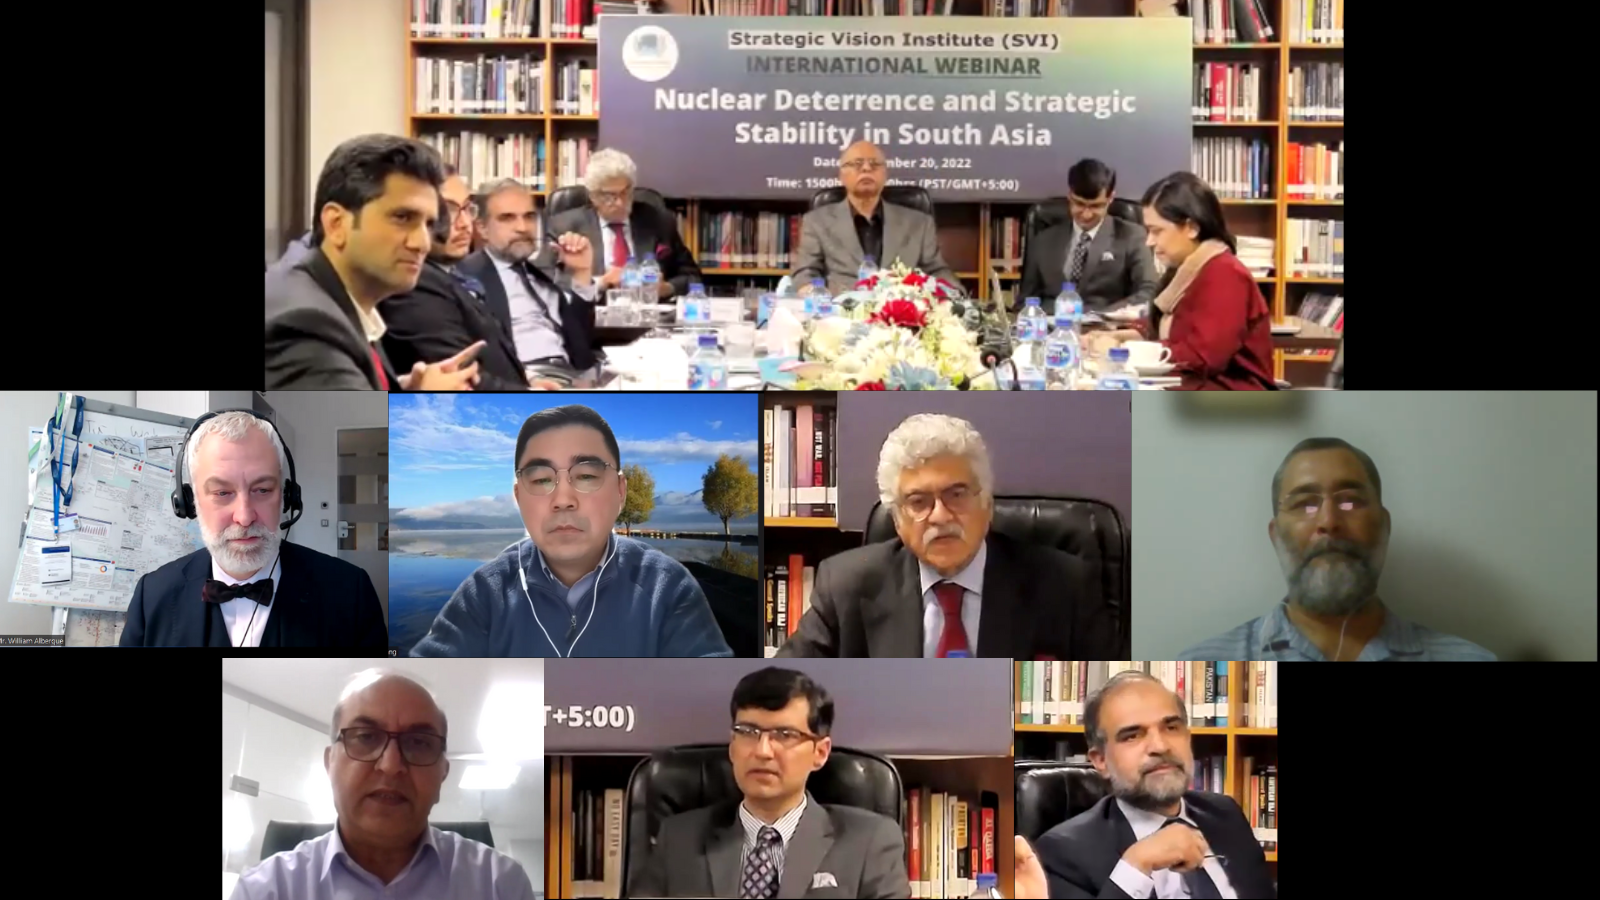 SVI International Webinar on “Nuclear Deterrence and Strategic Stability in South Asia” on December 20, 2022